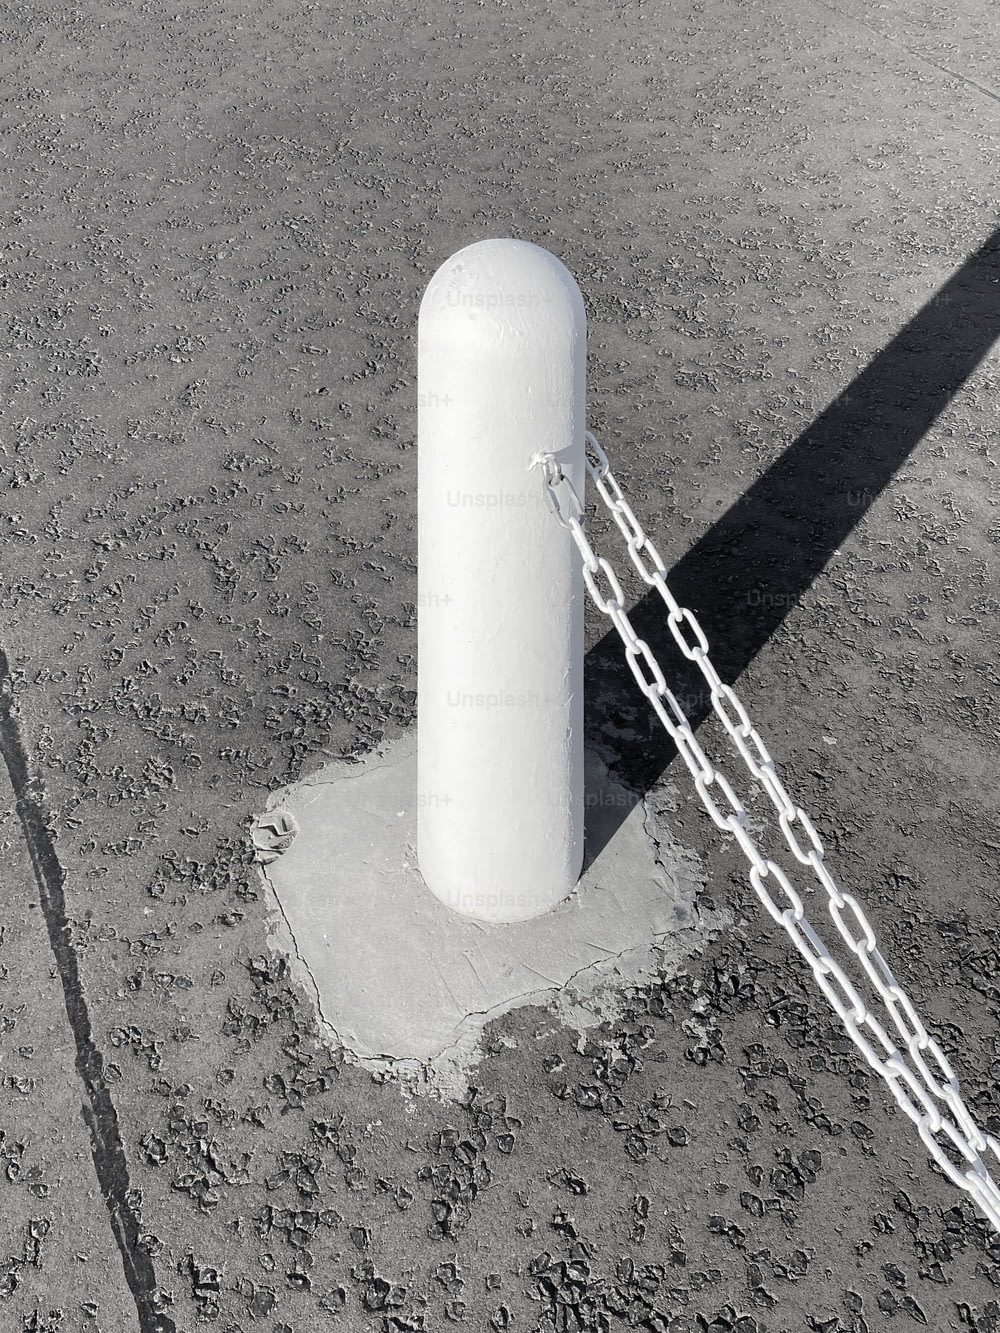 a large white object chained to a pole